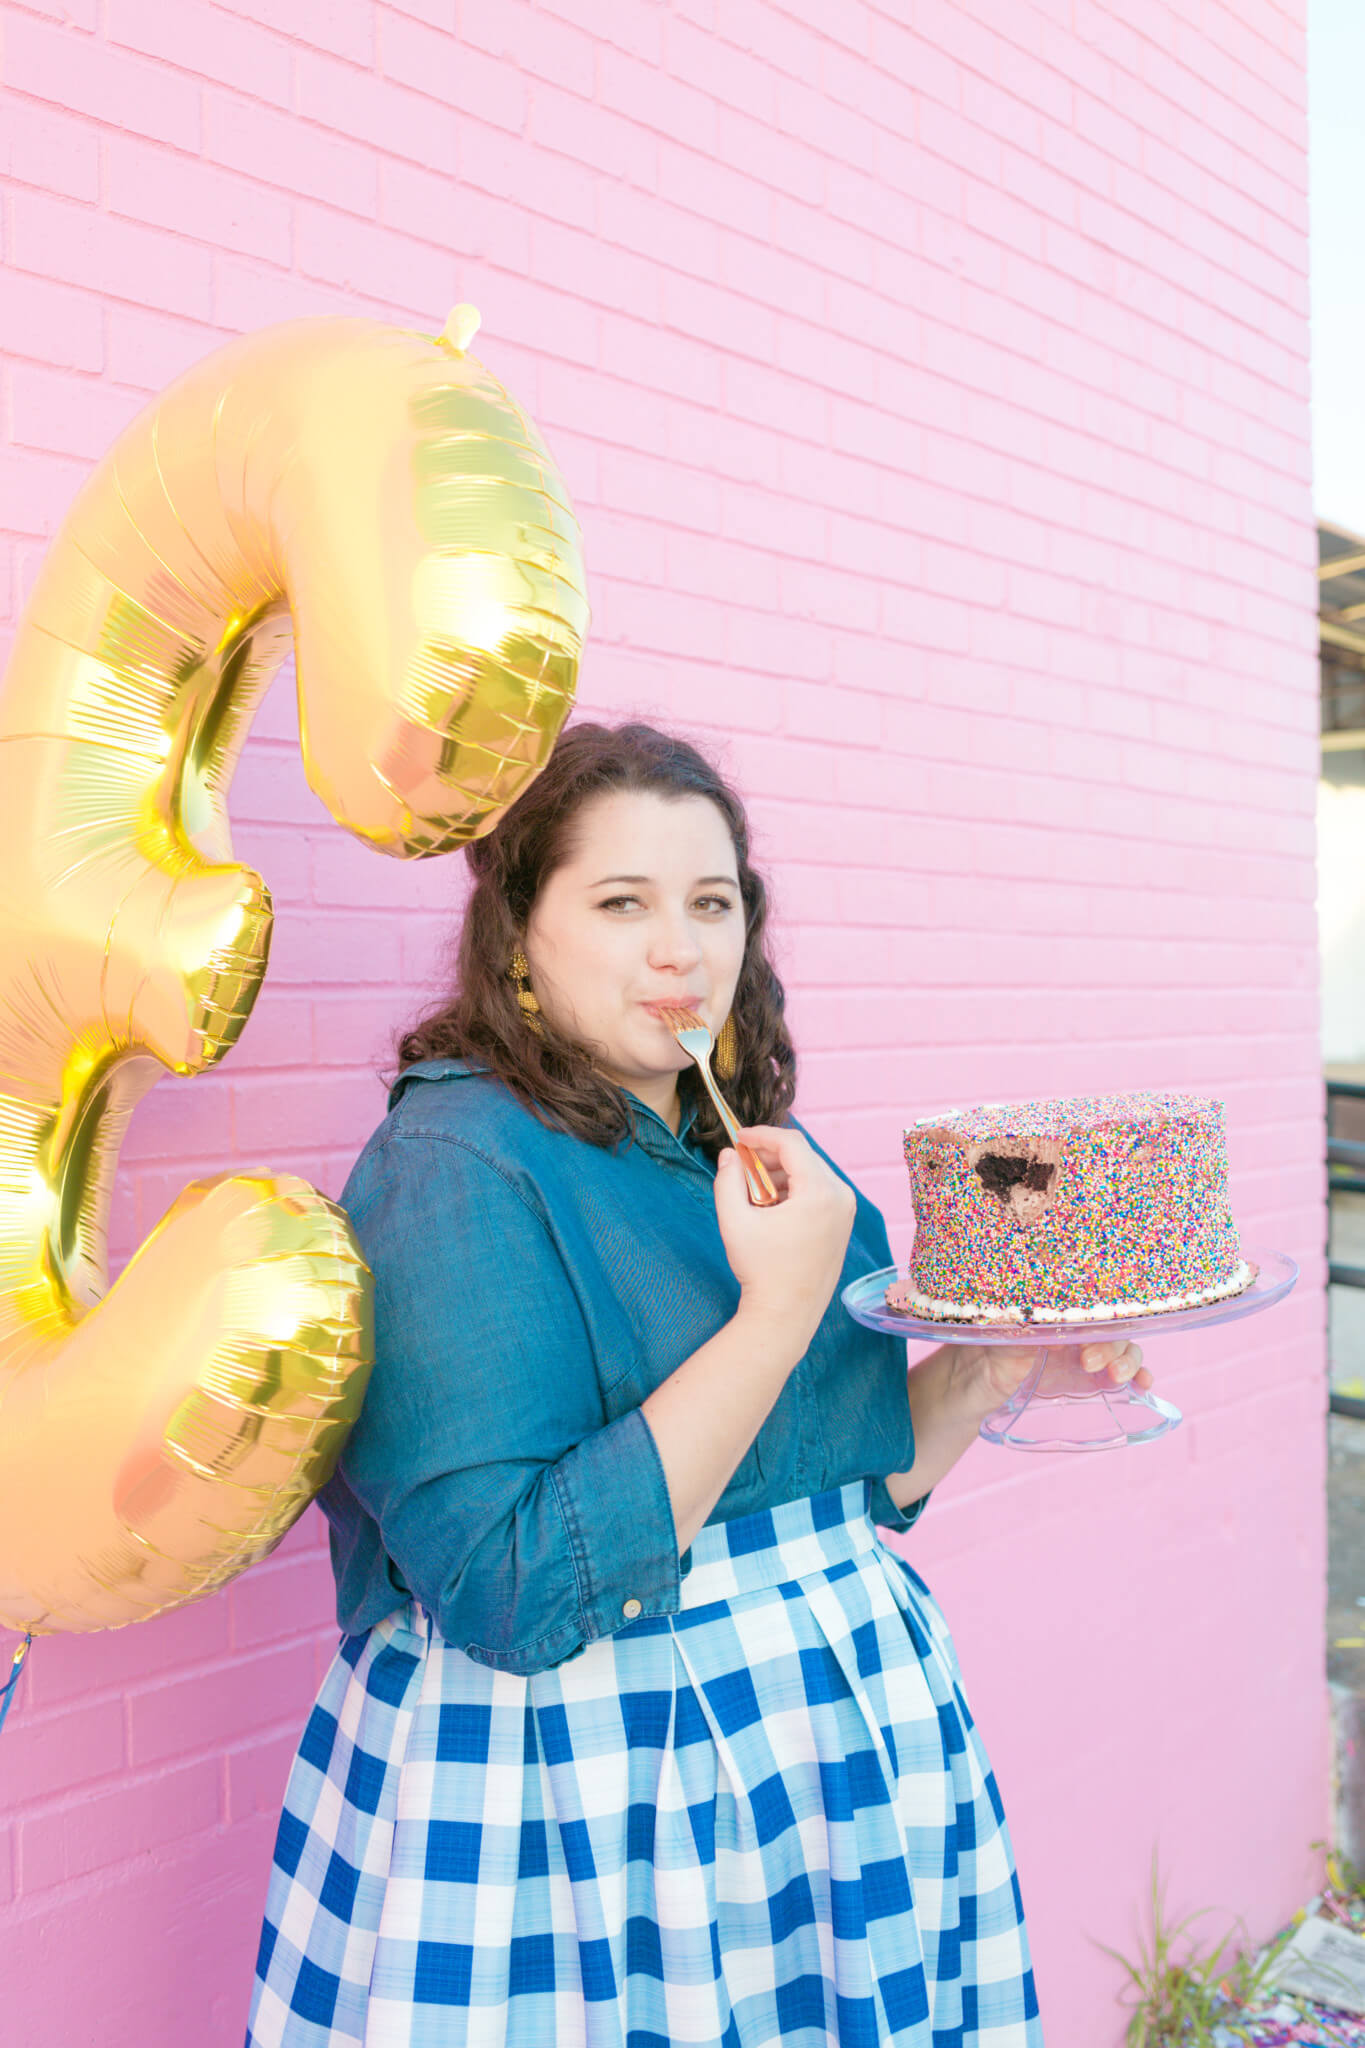 Will you join me in celebrating SGSB's 3rd birthday? | Something Gold, Something Blue a curvy fashion blog by Emily Bastedo